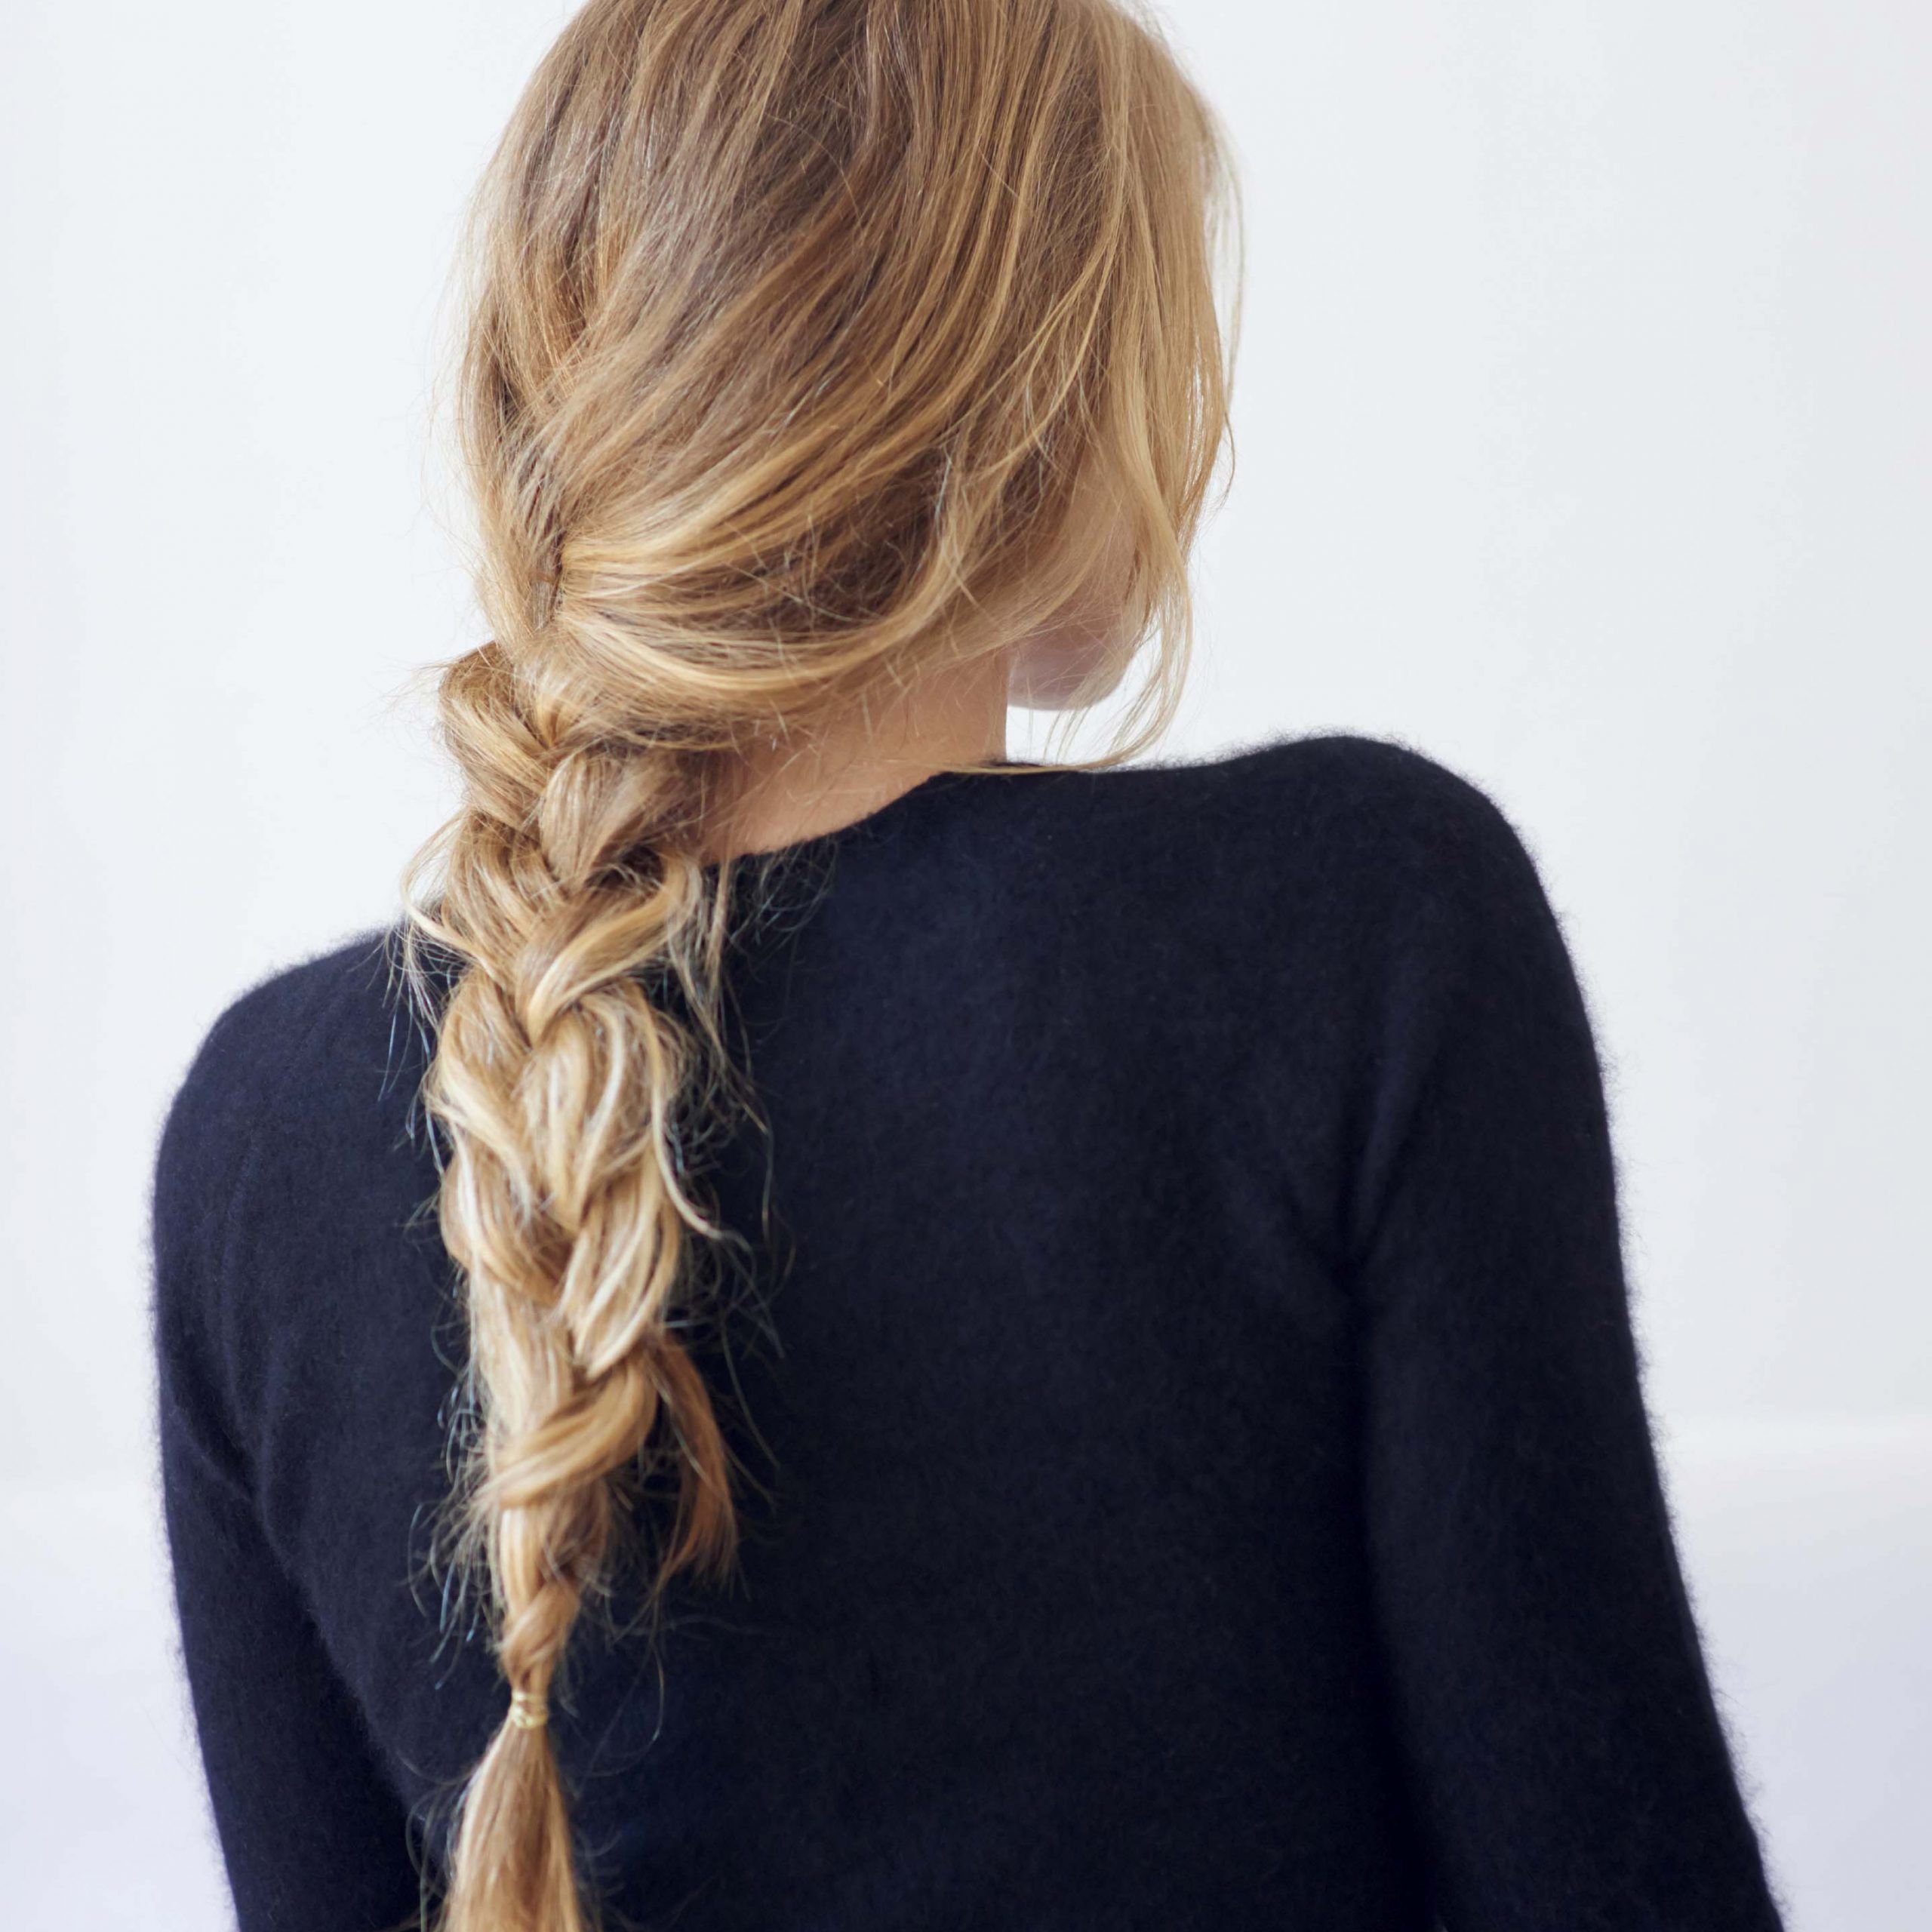 Braid Hairstyles 2016: This Year's Most Stylish Plaits With Regard To Most Recently Released Messy Twisted Braid Hairstyles (Gallery 19 of 20)